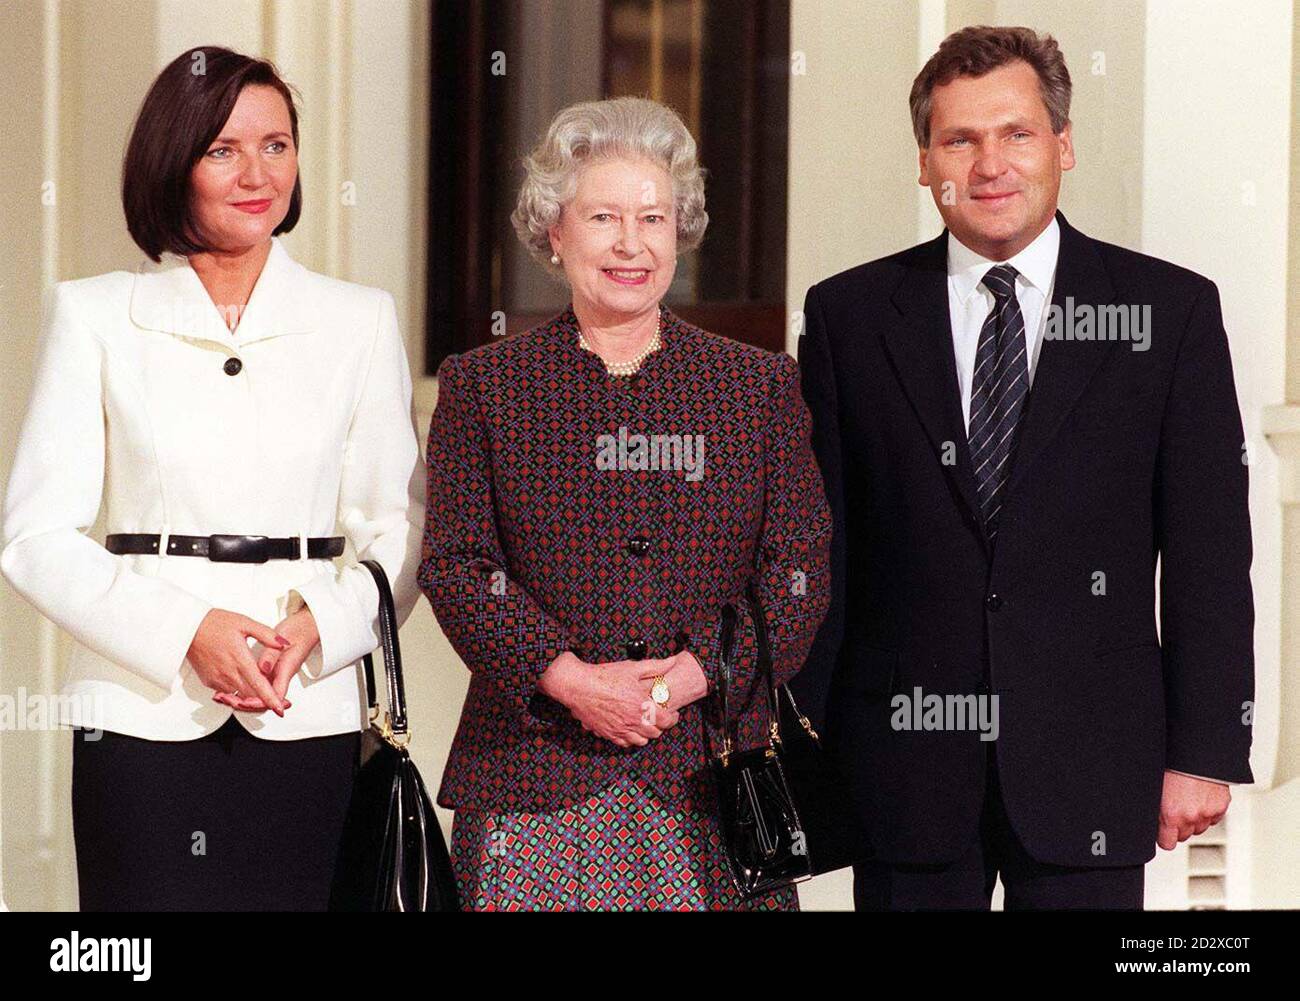 The Queen  greets Polish President Aleksander Kwasniewski and his wife Jolanta at Buckingham Palace today (Thursday) during his official visit to the UK. Photo by Fiona Hanson. WPA ROTA Stock Photo